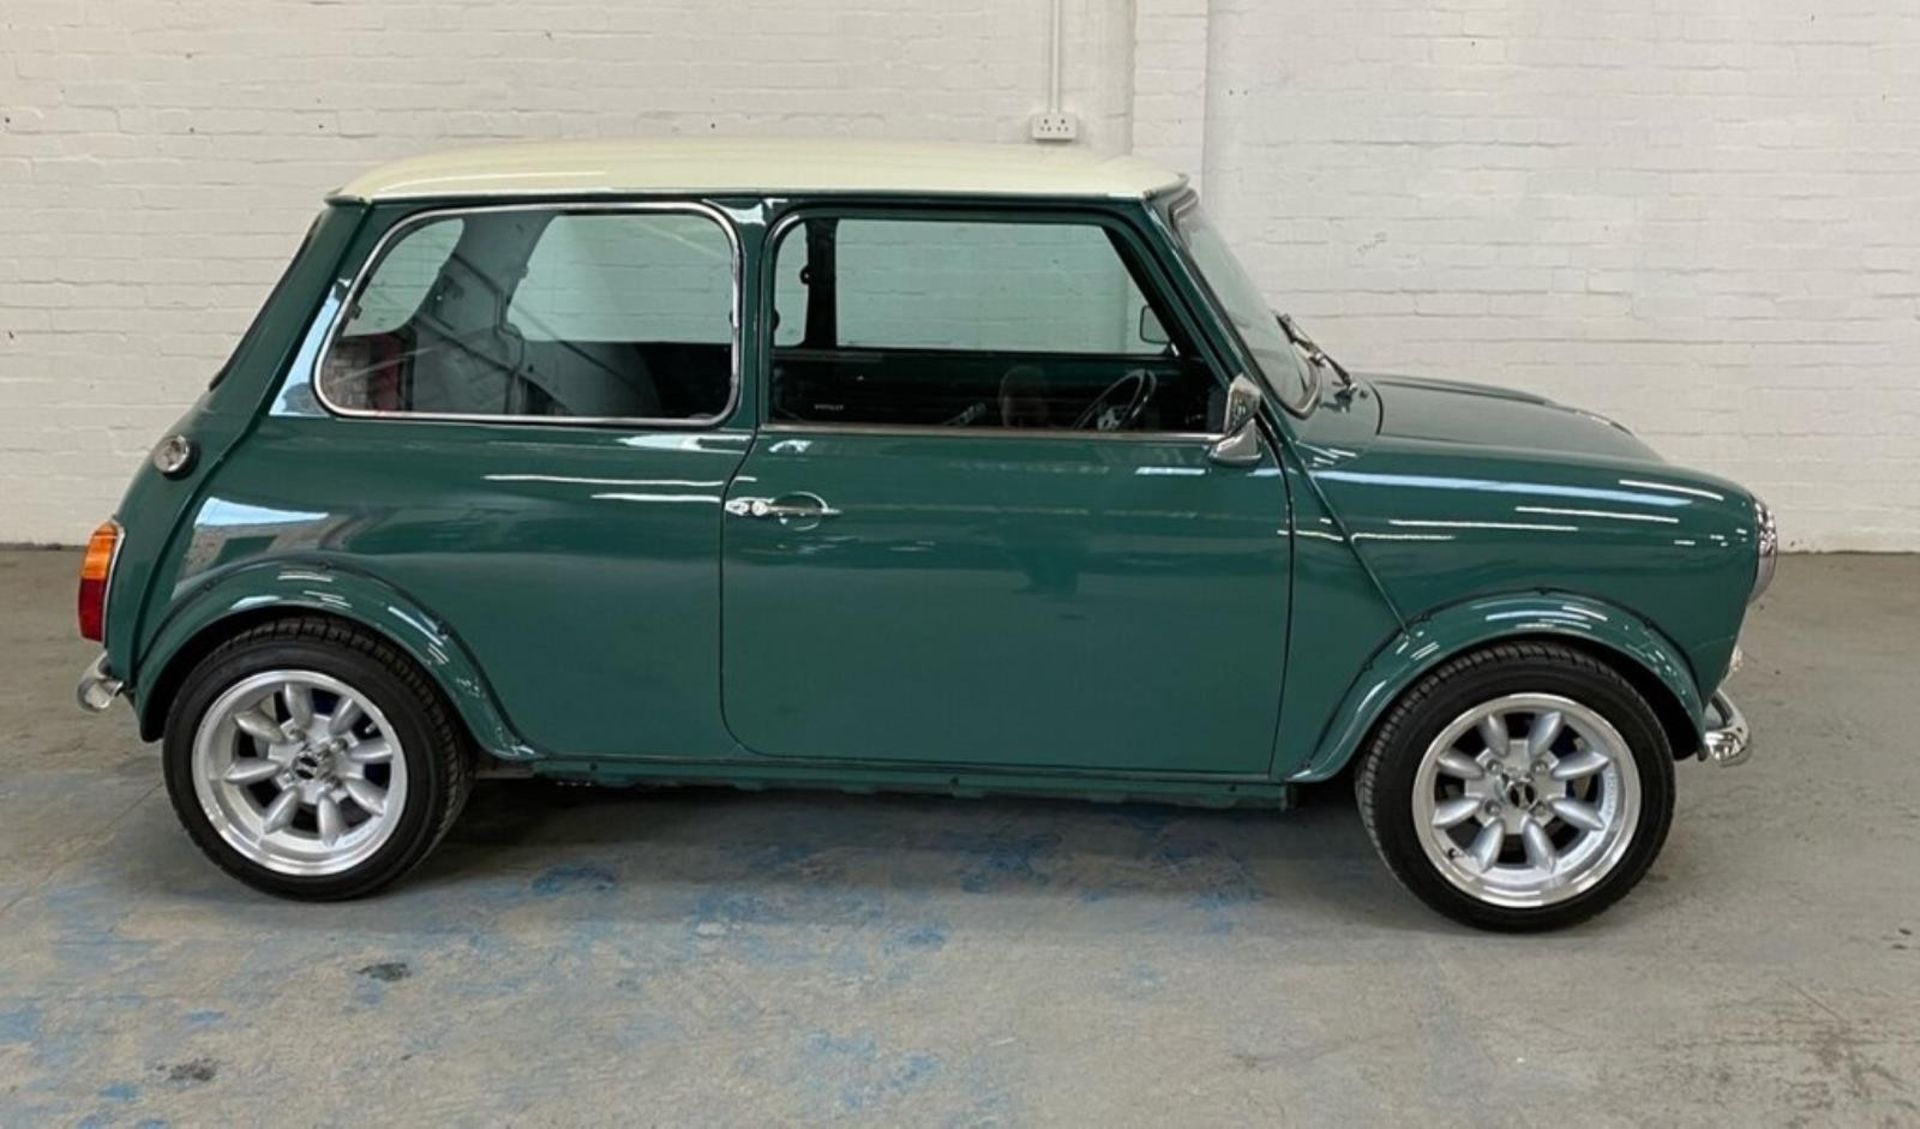 1971 Mini Cooper S Recreation Registration number KFB 656J Green with a white roof Black interior - Image 2 of 18